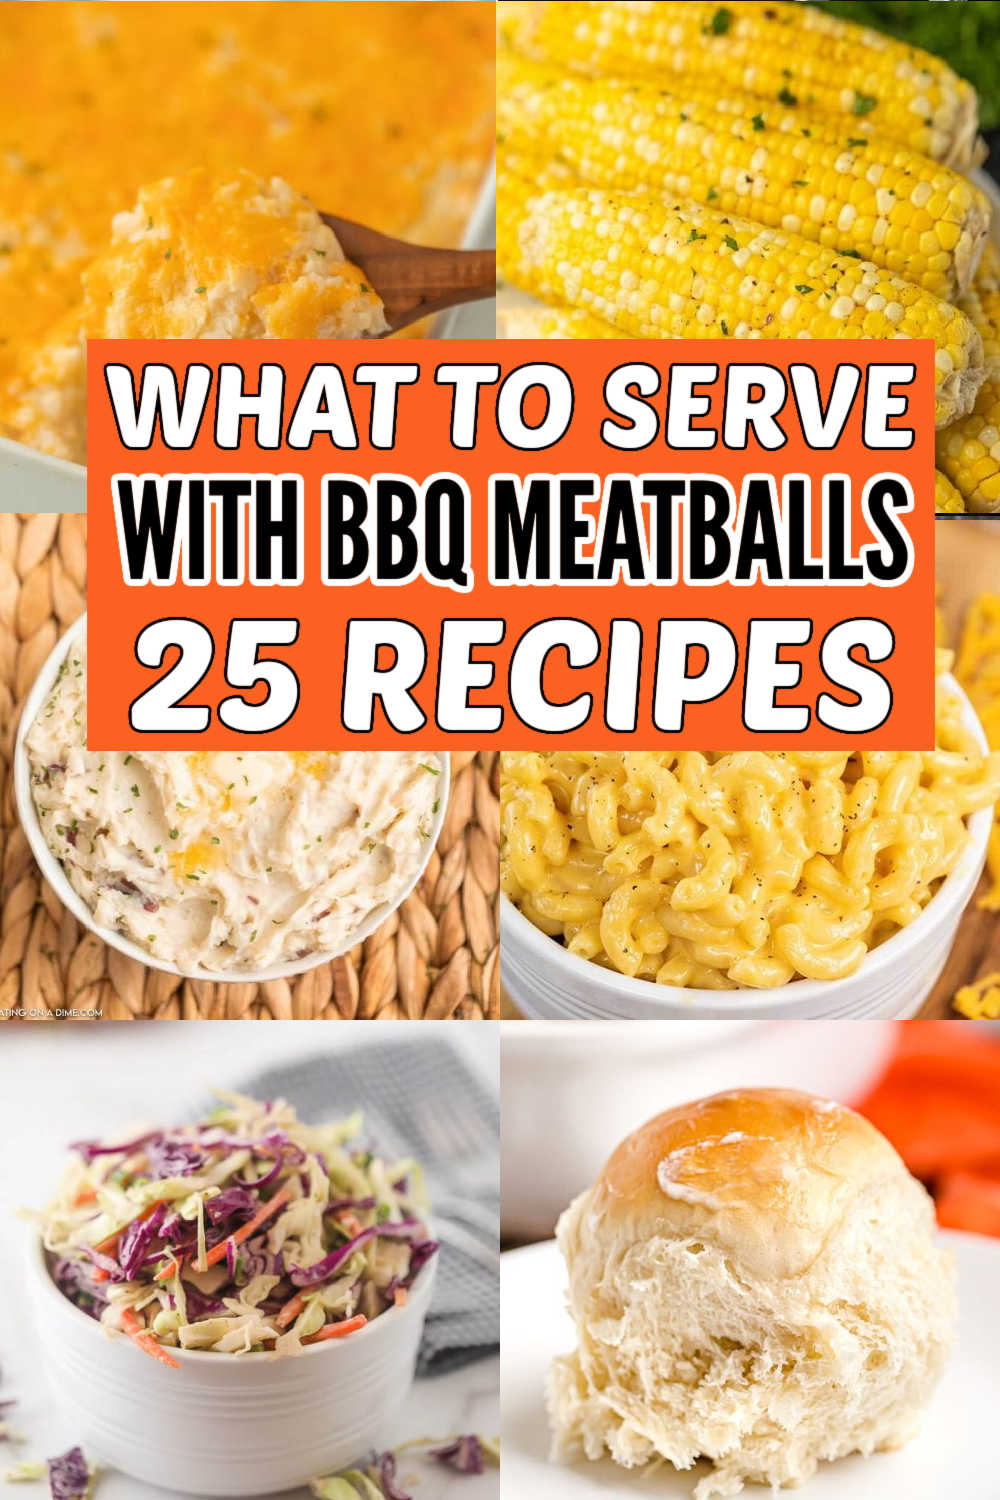 Are you needing to know What to Serve with BBQ Meatballs? We have gathered our favorite sides to help complete your meal. These 25 side dishes are the best side dishes to serve with BBQ Meatballs. We even have added some easy Meatball Recipes that are kid approved.  #eatingonadime #whattoservewithbbqmeatballs #bbqmeatballsidedish